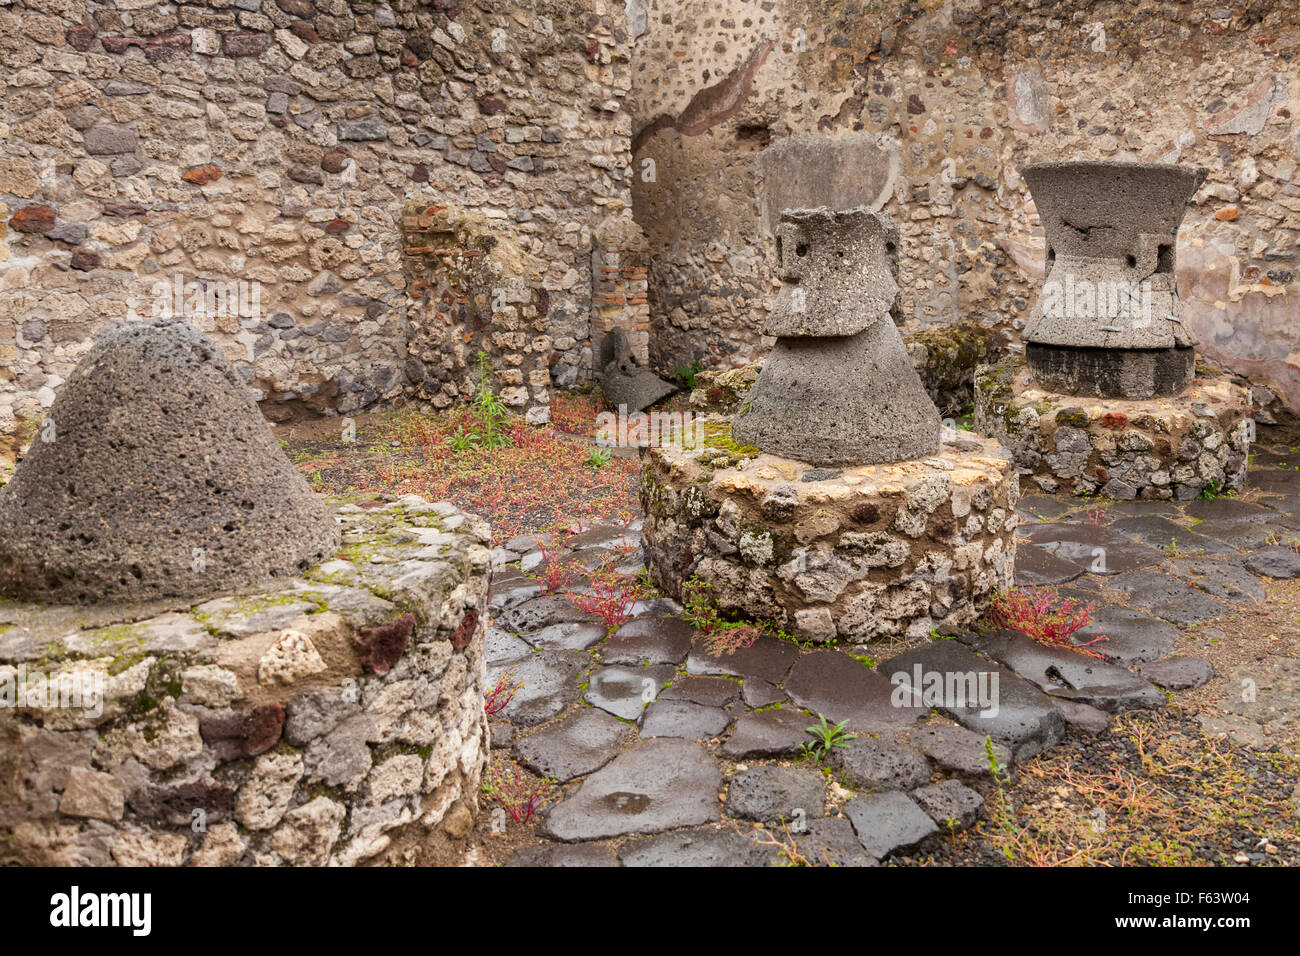 Panificio, the bakery and ovens in Vicolo Storto in the ancient Roman ruins of Pompeii, Italy Stock Photo